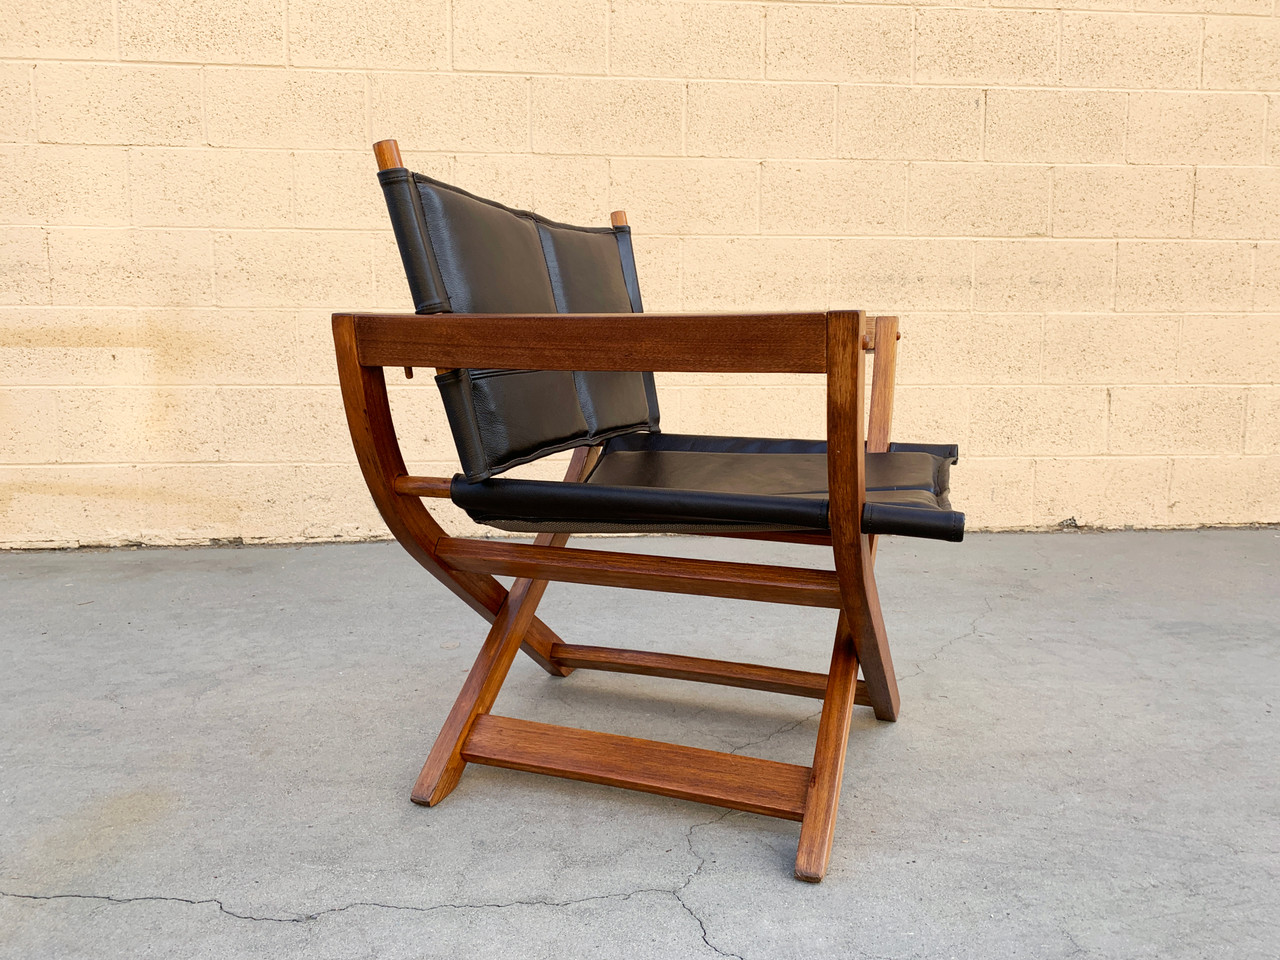 SOLD - 1970s Modern Teak and Leather Folding Chair ...